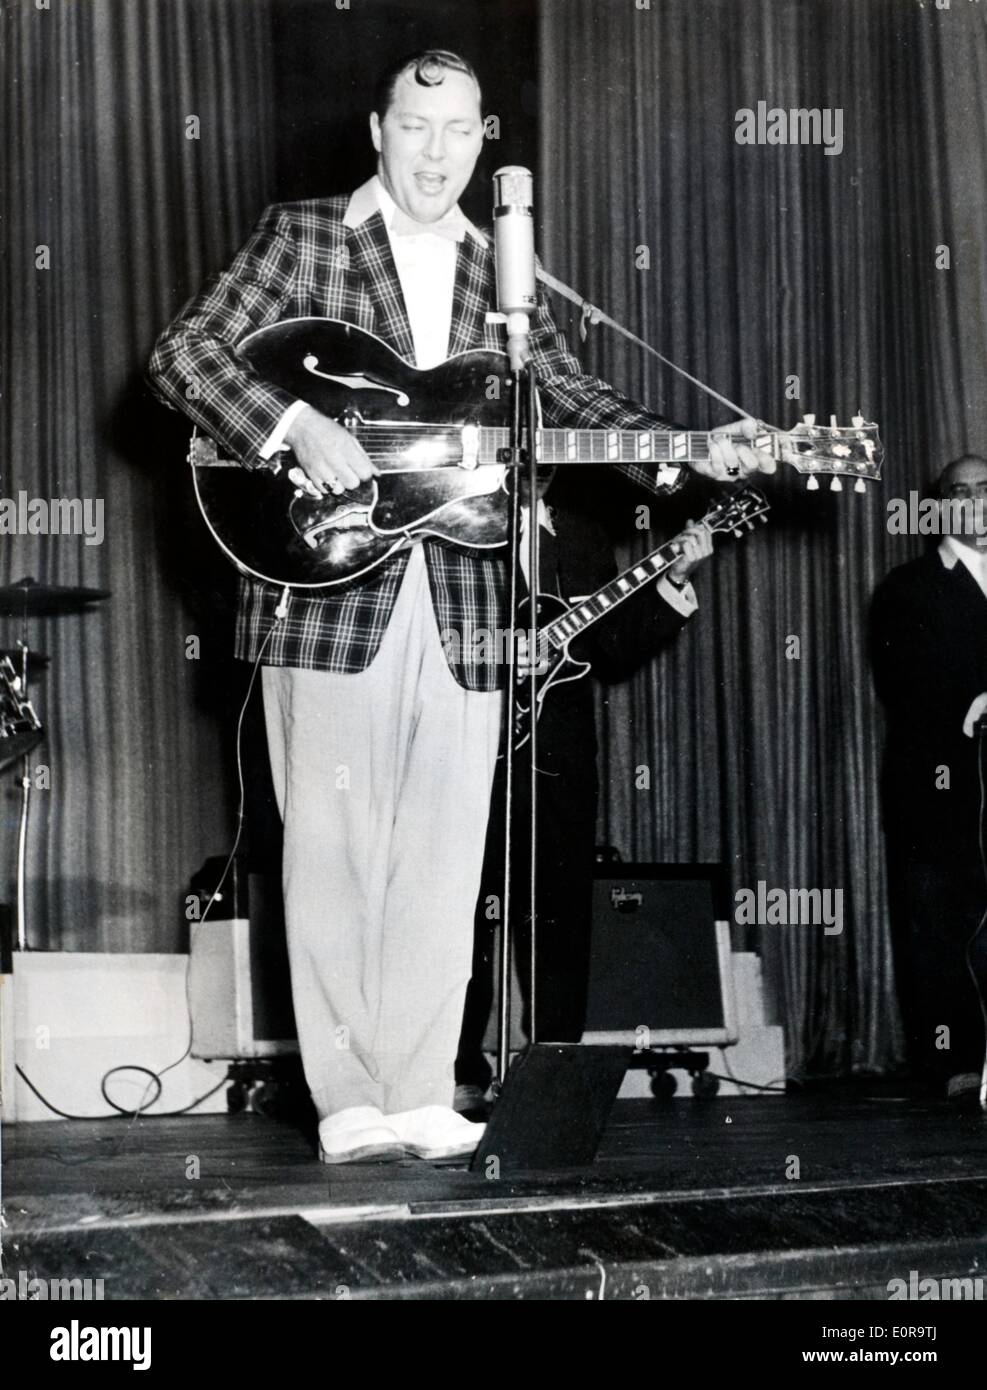 Bill Haley on stage playing guitar and singing at a concert Stock Photo